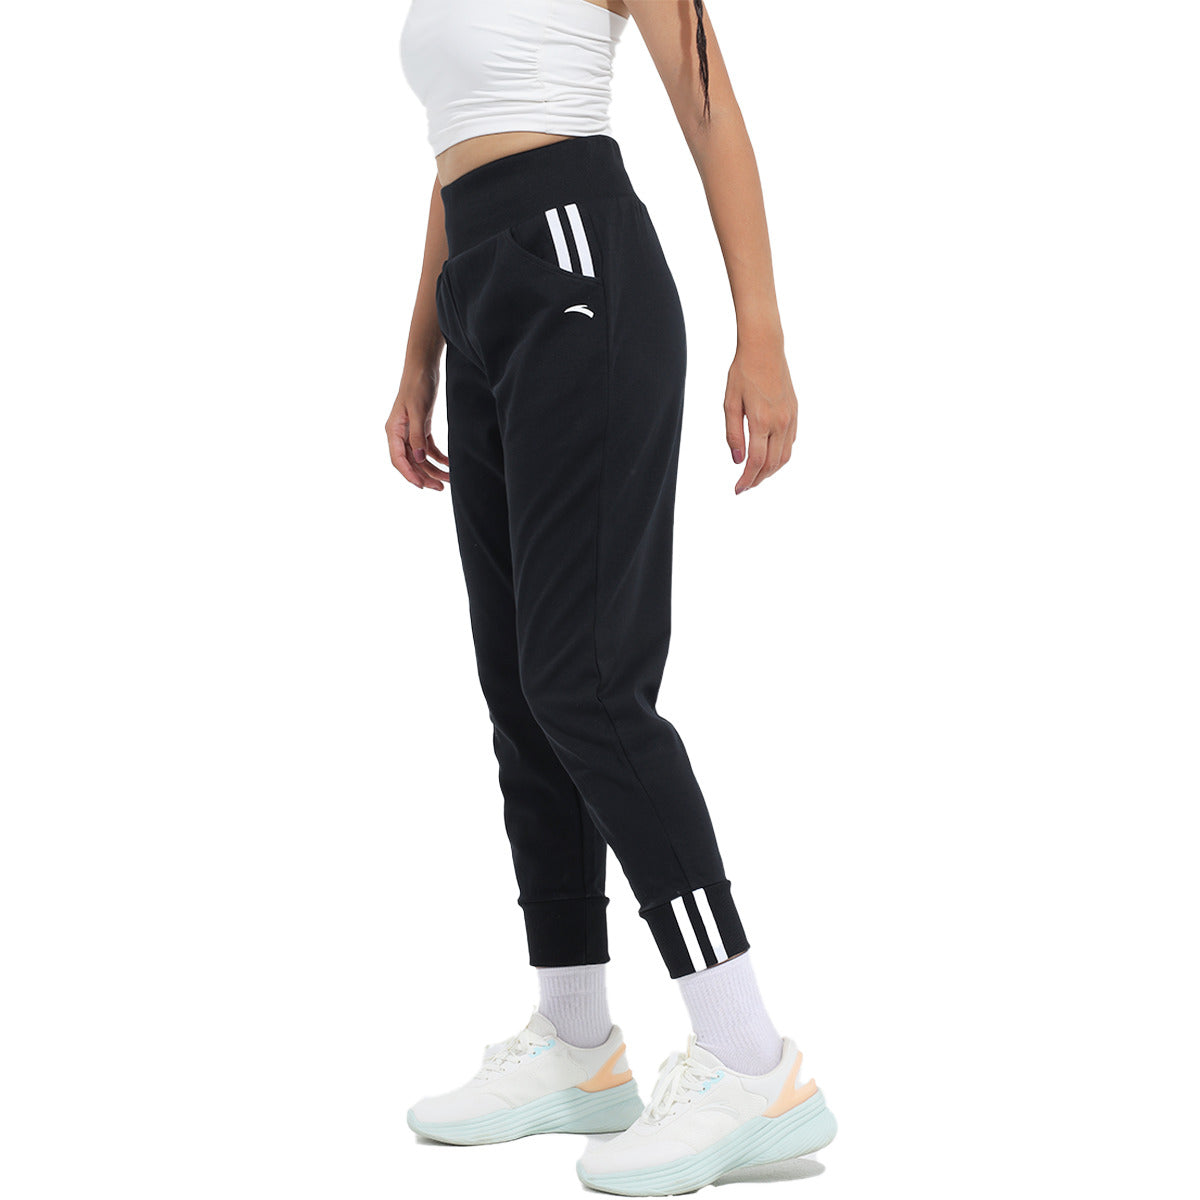 Anta Knit Track Casual Sweatpants For Women, Black